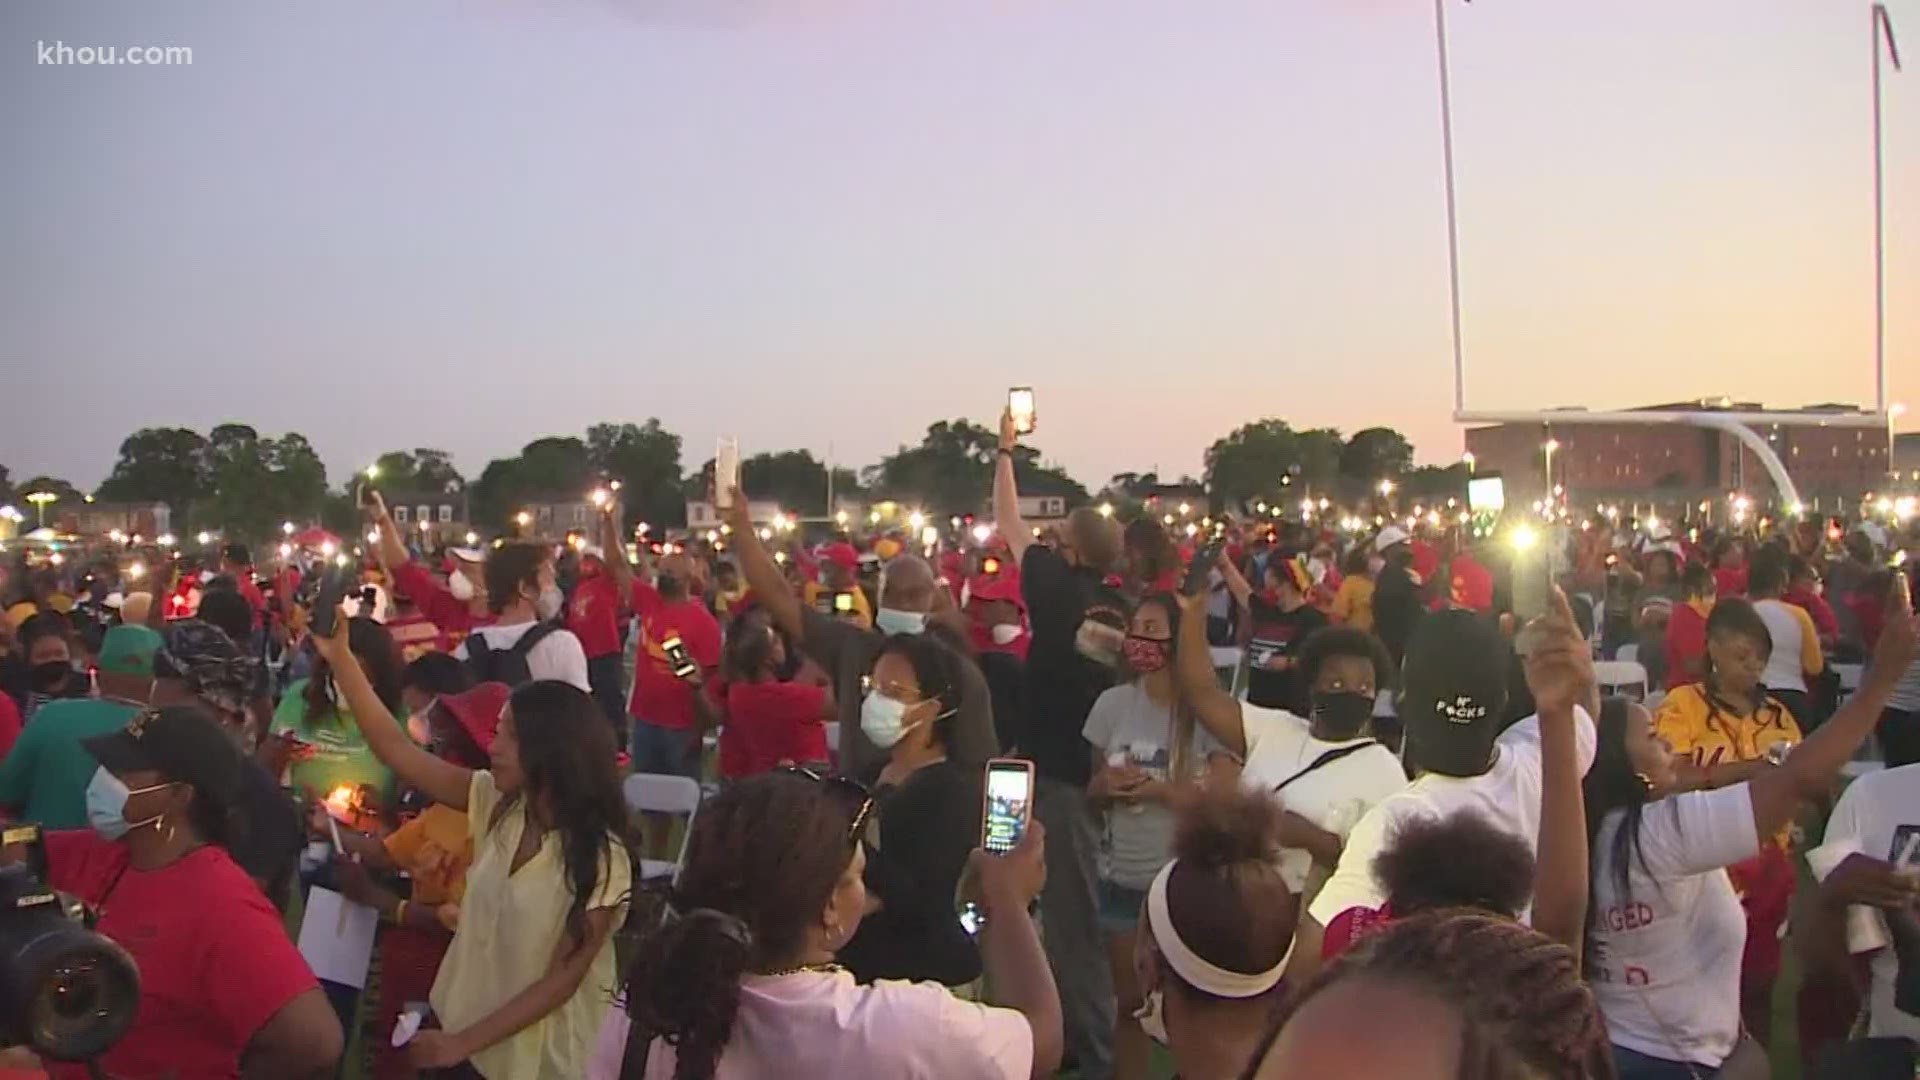 Hundreds showed up for a candlelight vigil Monday honoring George Floyd at Jack Yates High School in Houston’s Third Ward.